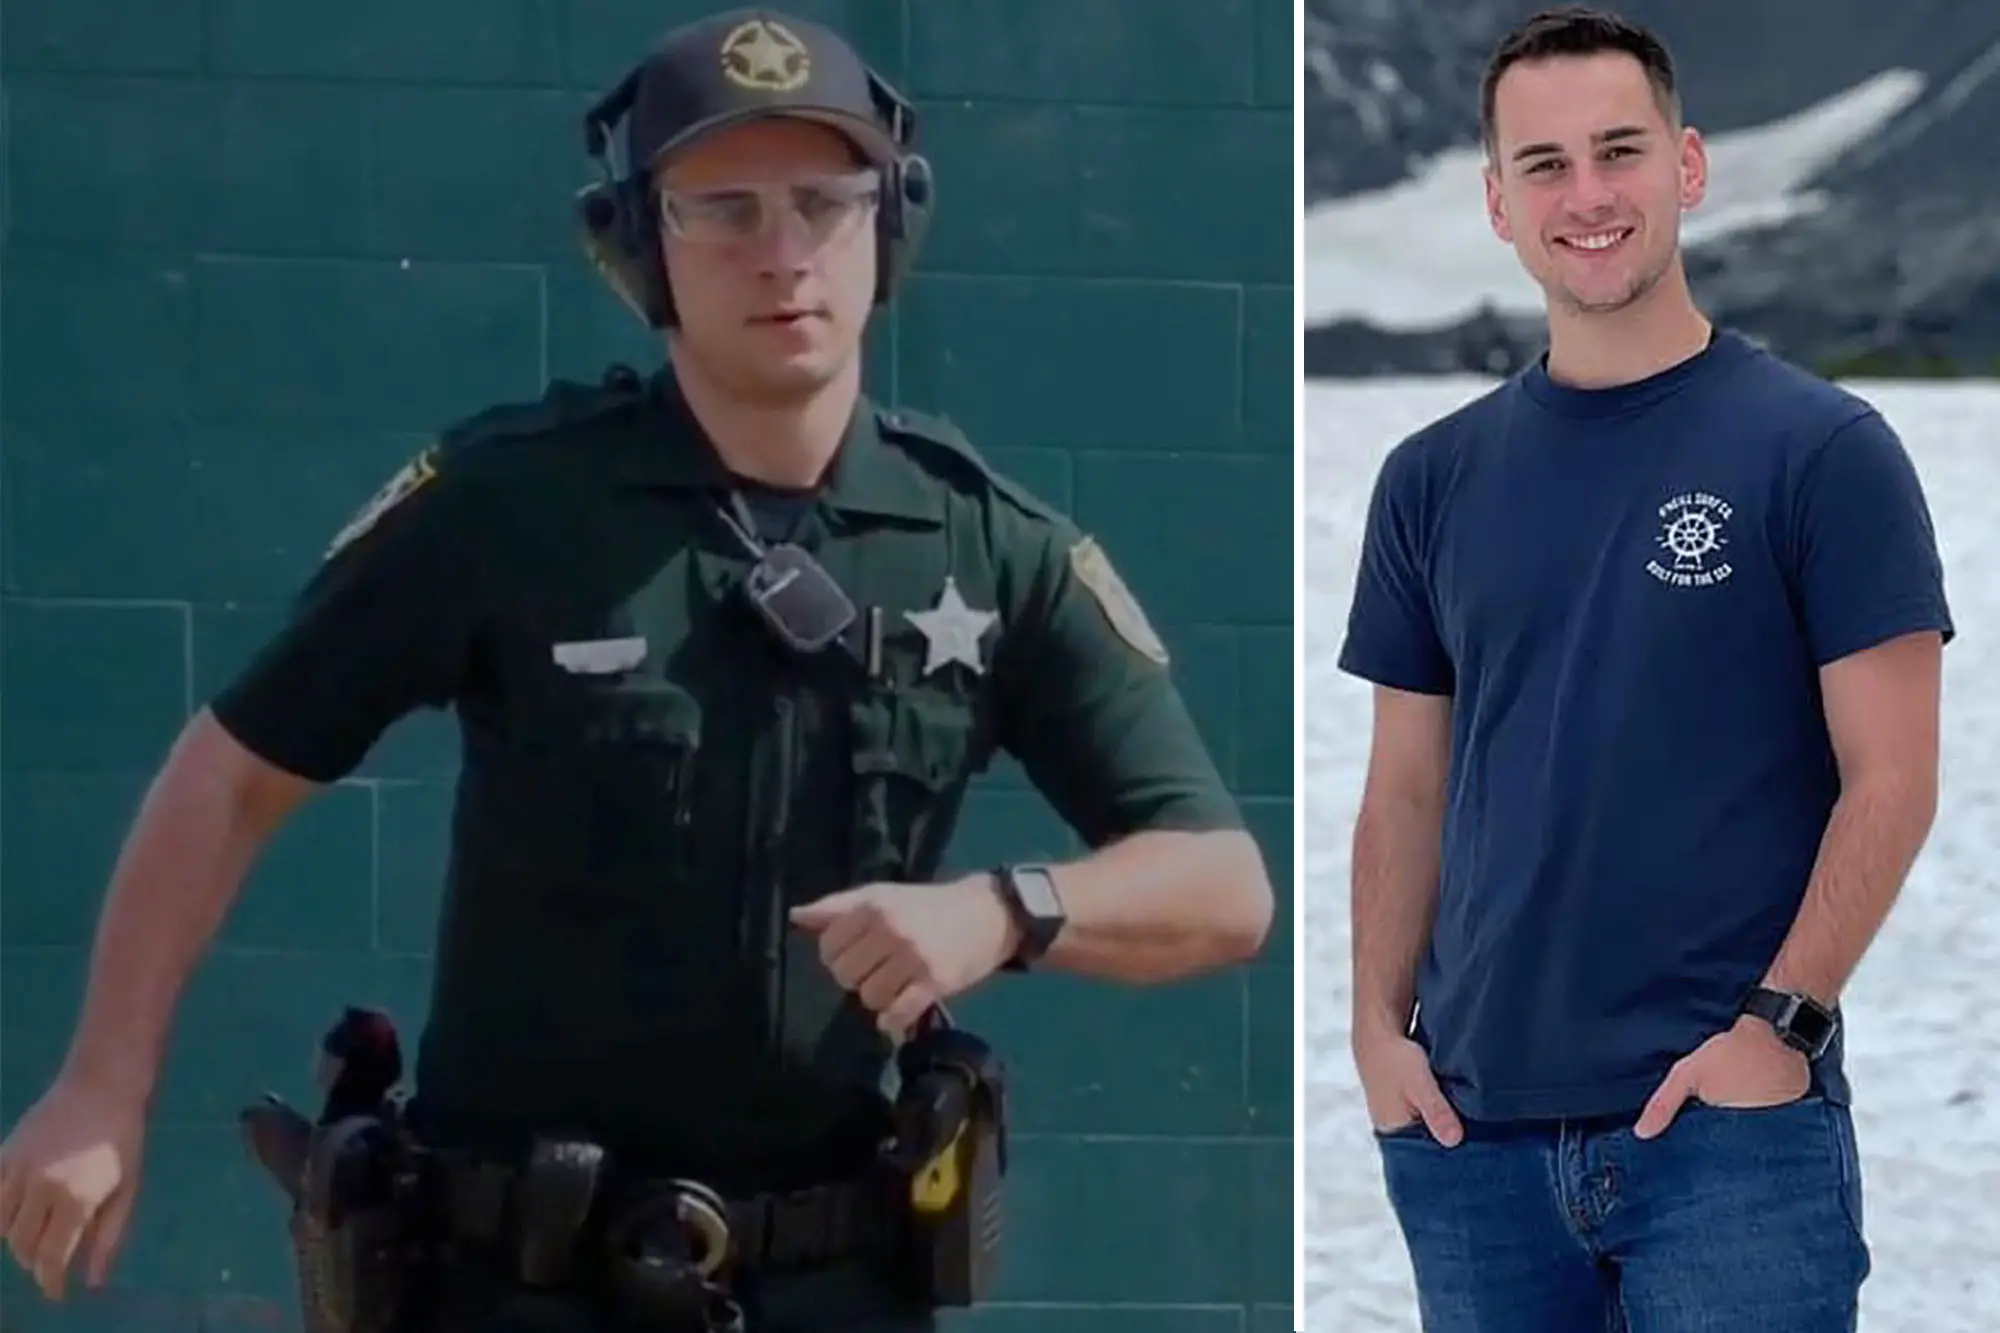 Florida cop accidentally shoots best friend to death while playing video games